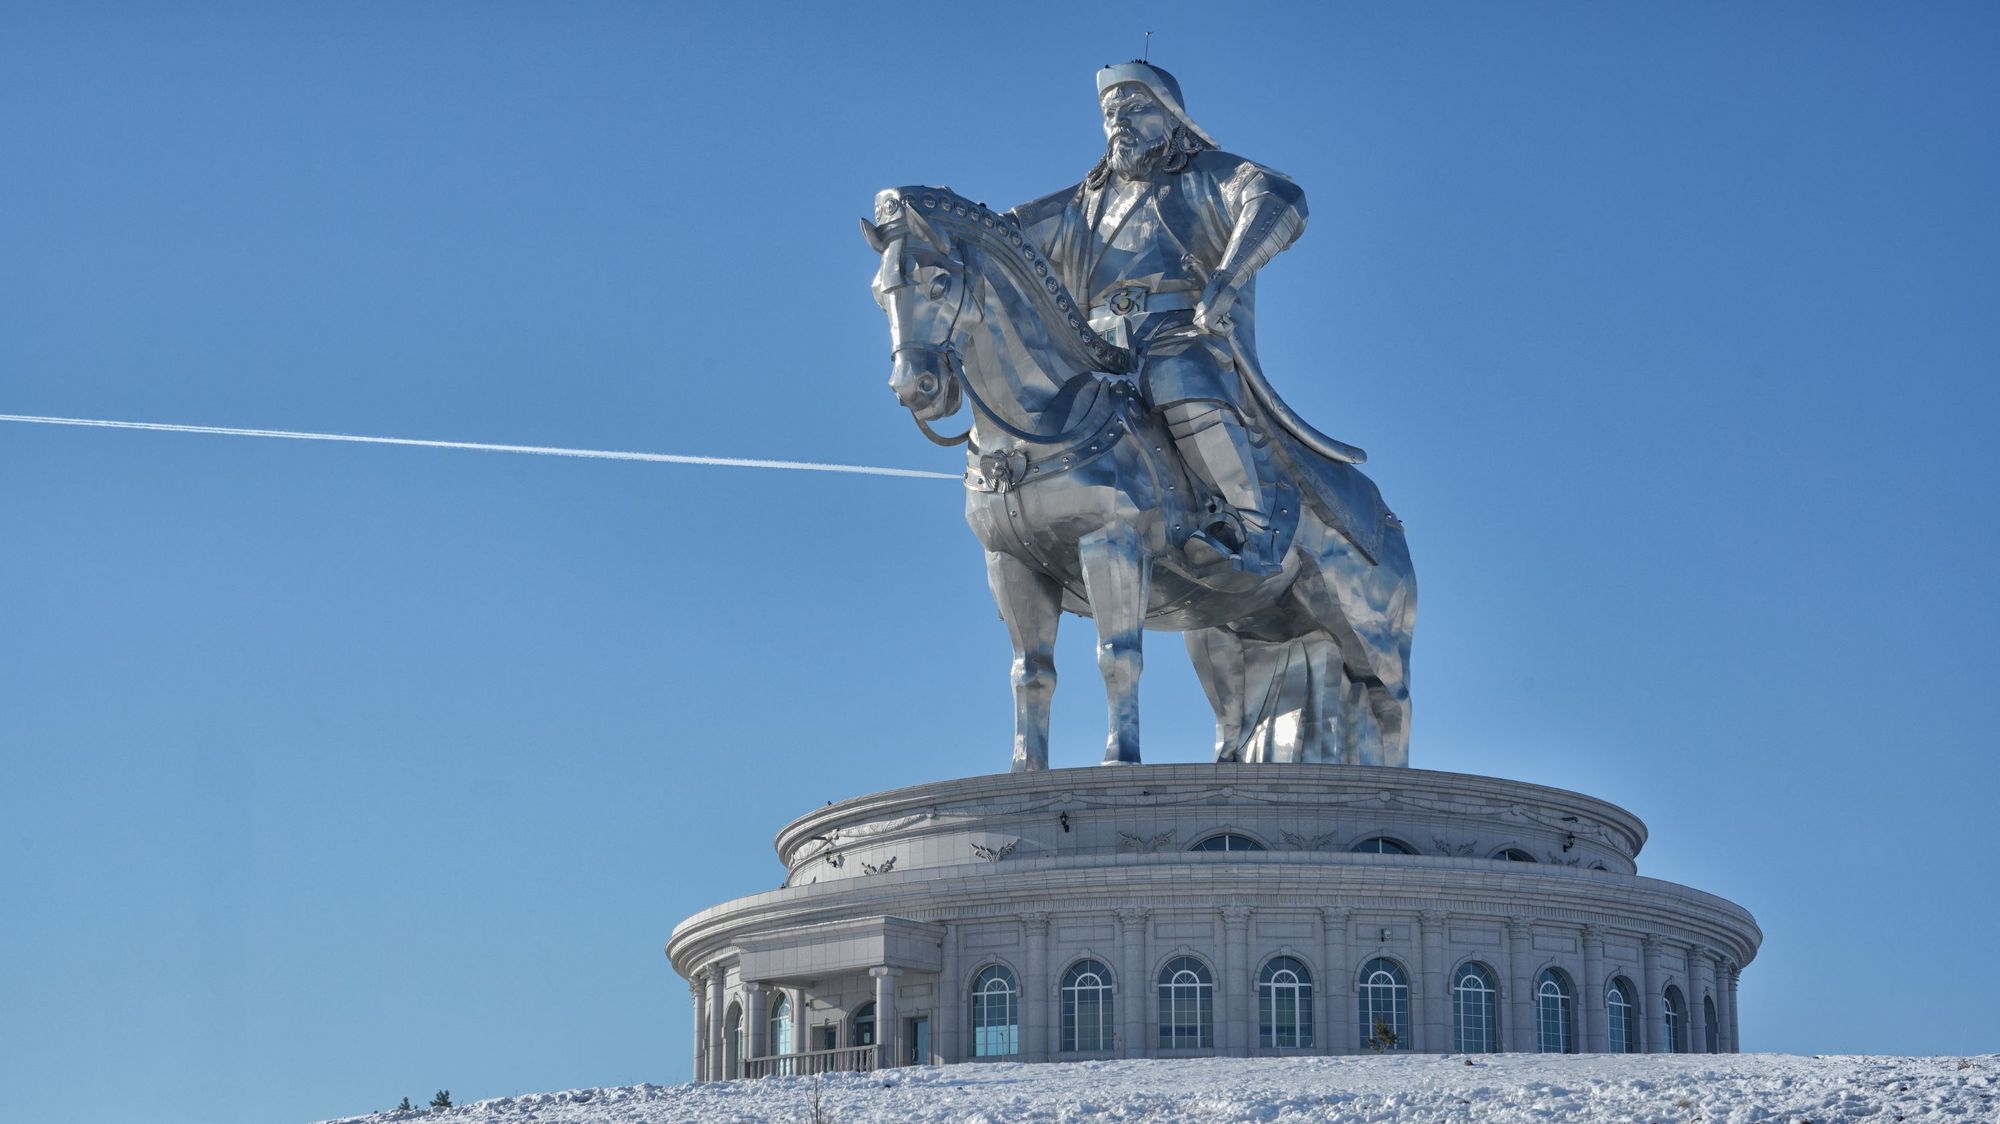 The Chinggis Khaan equestrian statue, 45-miles east of the capital city of Ulaanbaatar, in Mongolia.